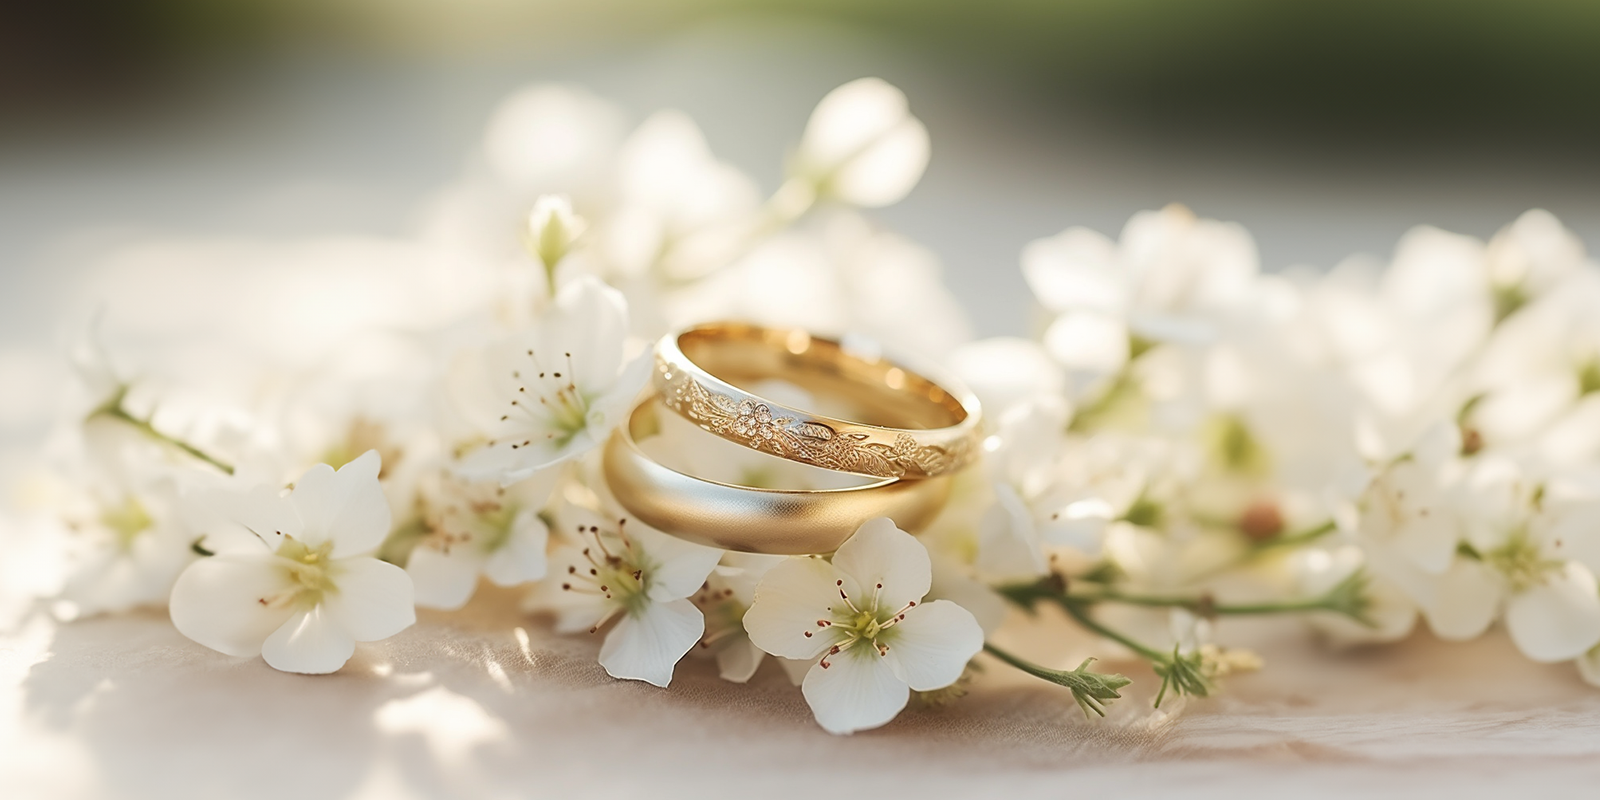 feature image of two gold wedding bands on a bed of white flowers